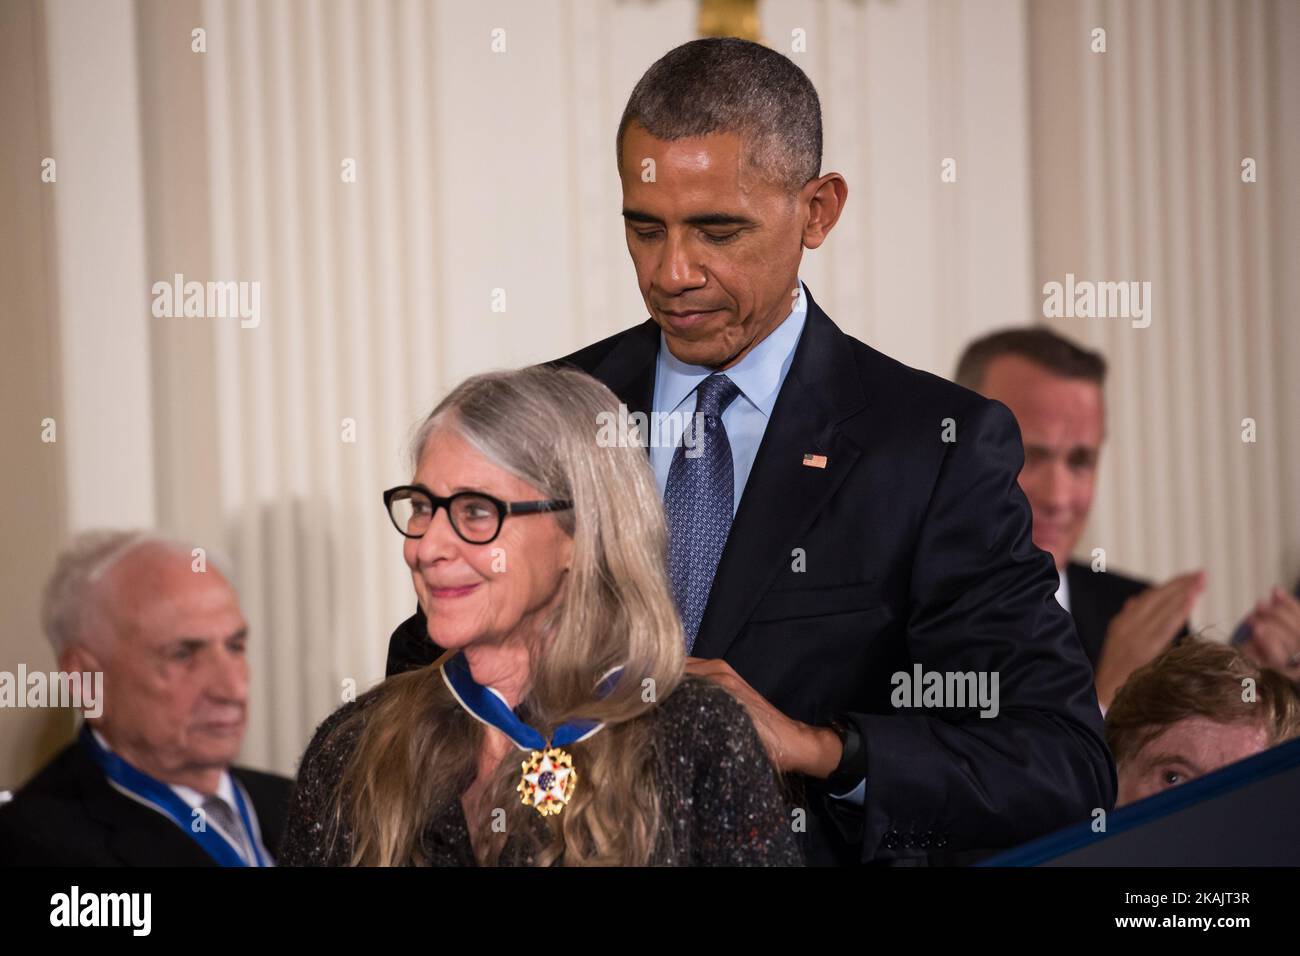 President Barack Obama awarded the Presidential Medal of Freedom to Margaret H. Hamilton, a pioneering computer scientist and former head of the Software Engineering Division of MIT's Instrumentation Laboratory who led the development of on-board flight software for NASA's Apollo moon missions. (Photo by Cheriss May/NurPhoto) *** Please Use Credit from Credit Field *** Stock Photo